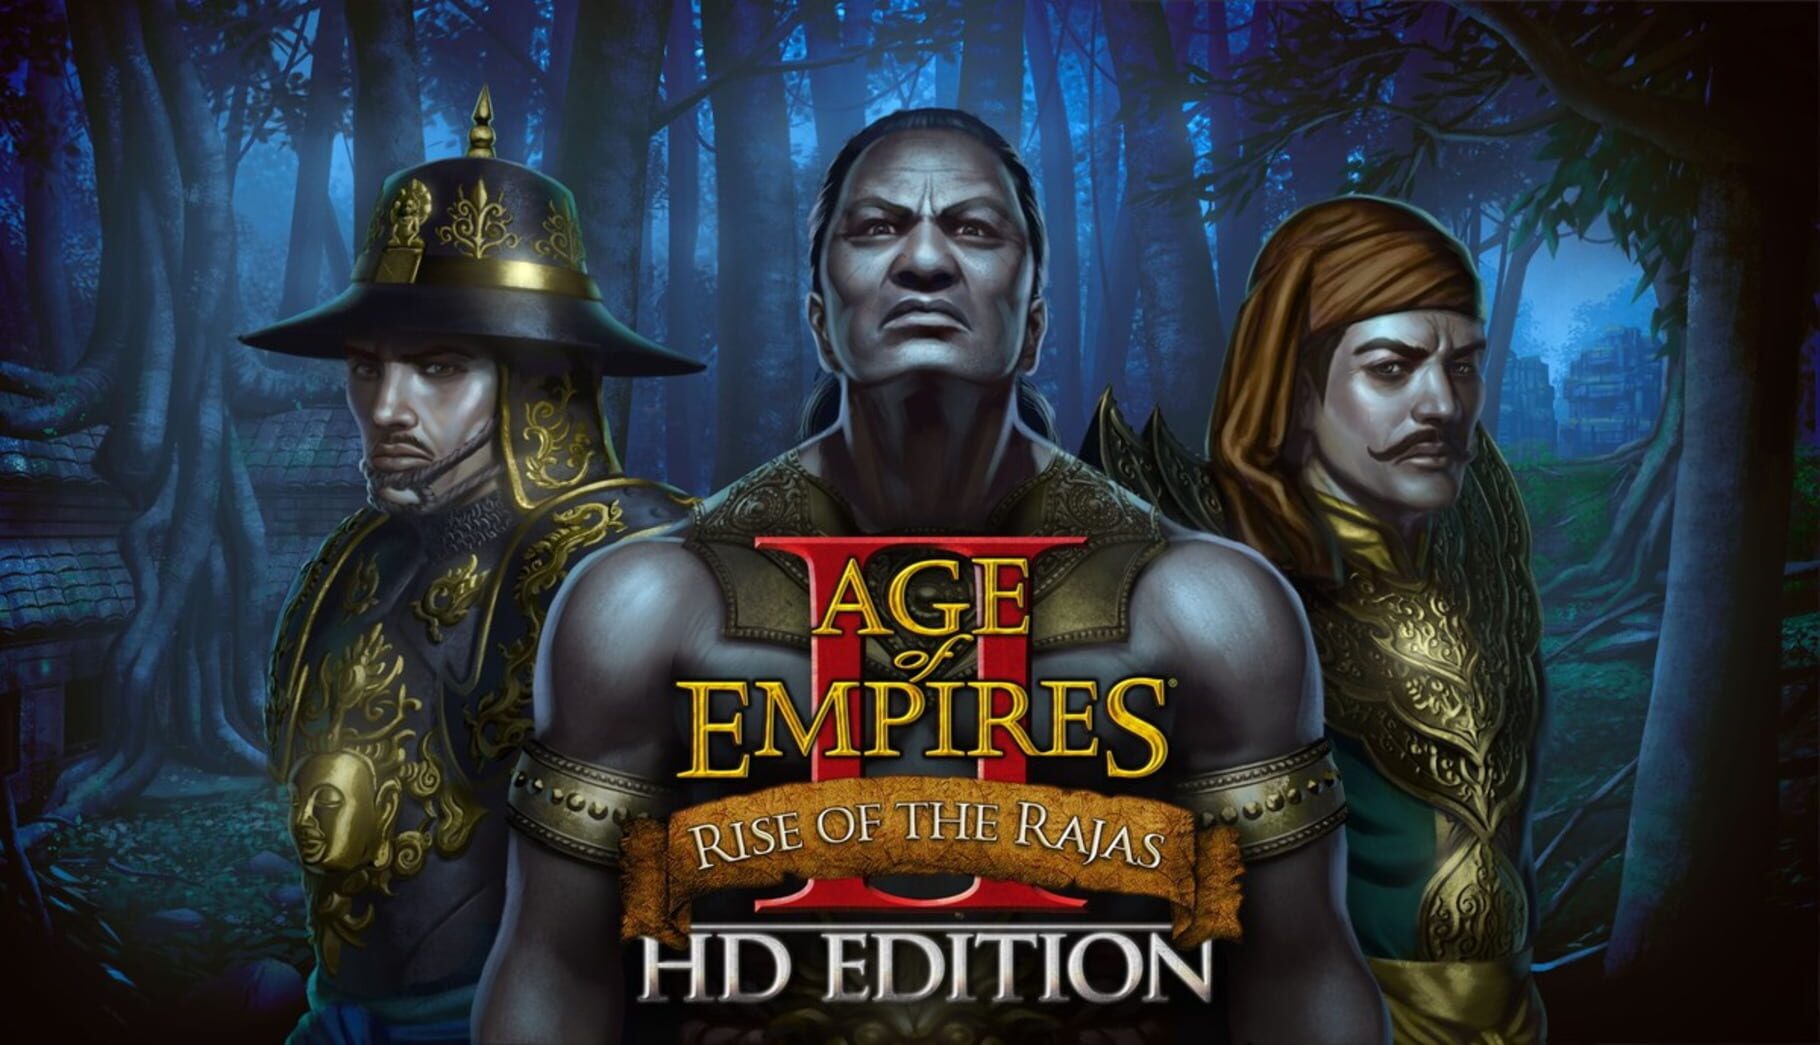 Arte - Age of Empires II: HD Edition - Rise of the Rajas